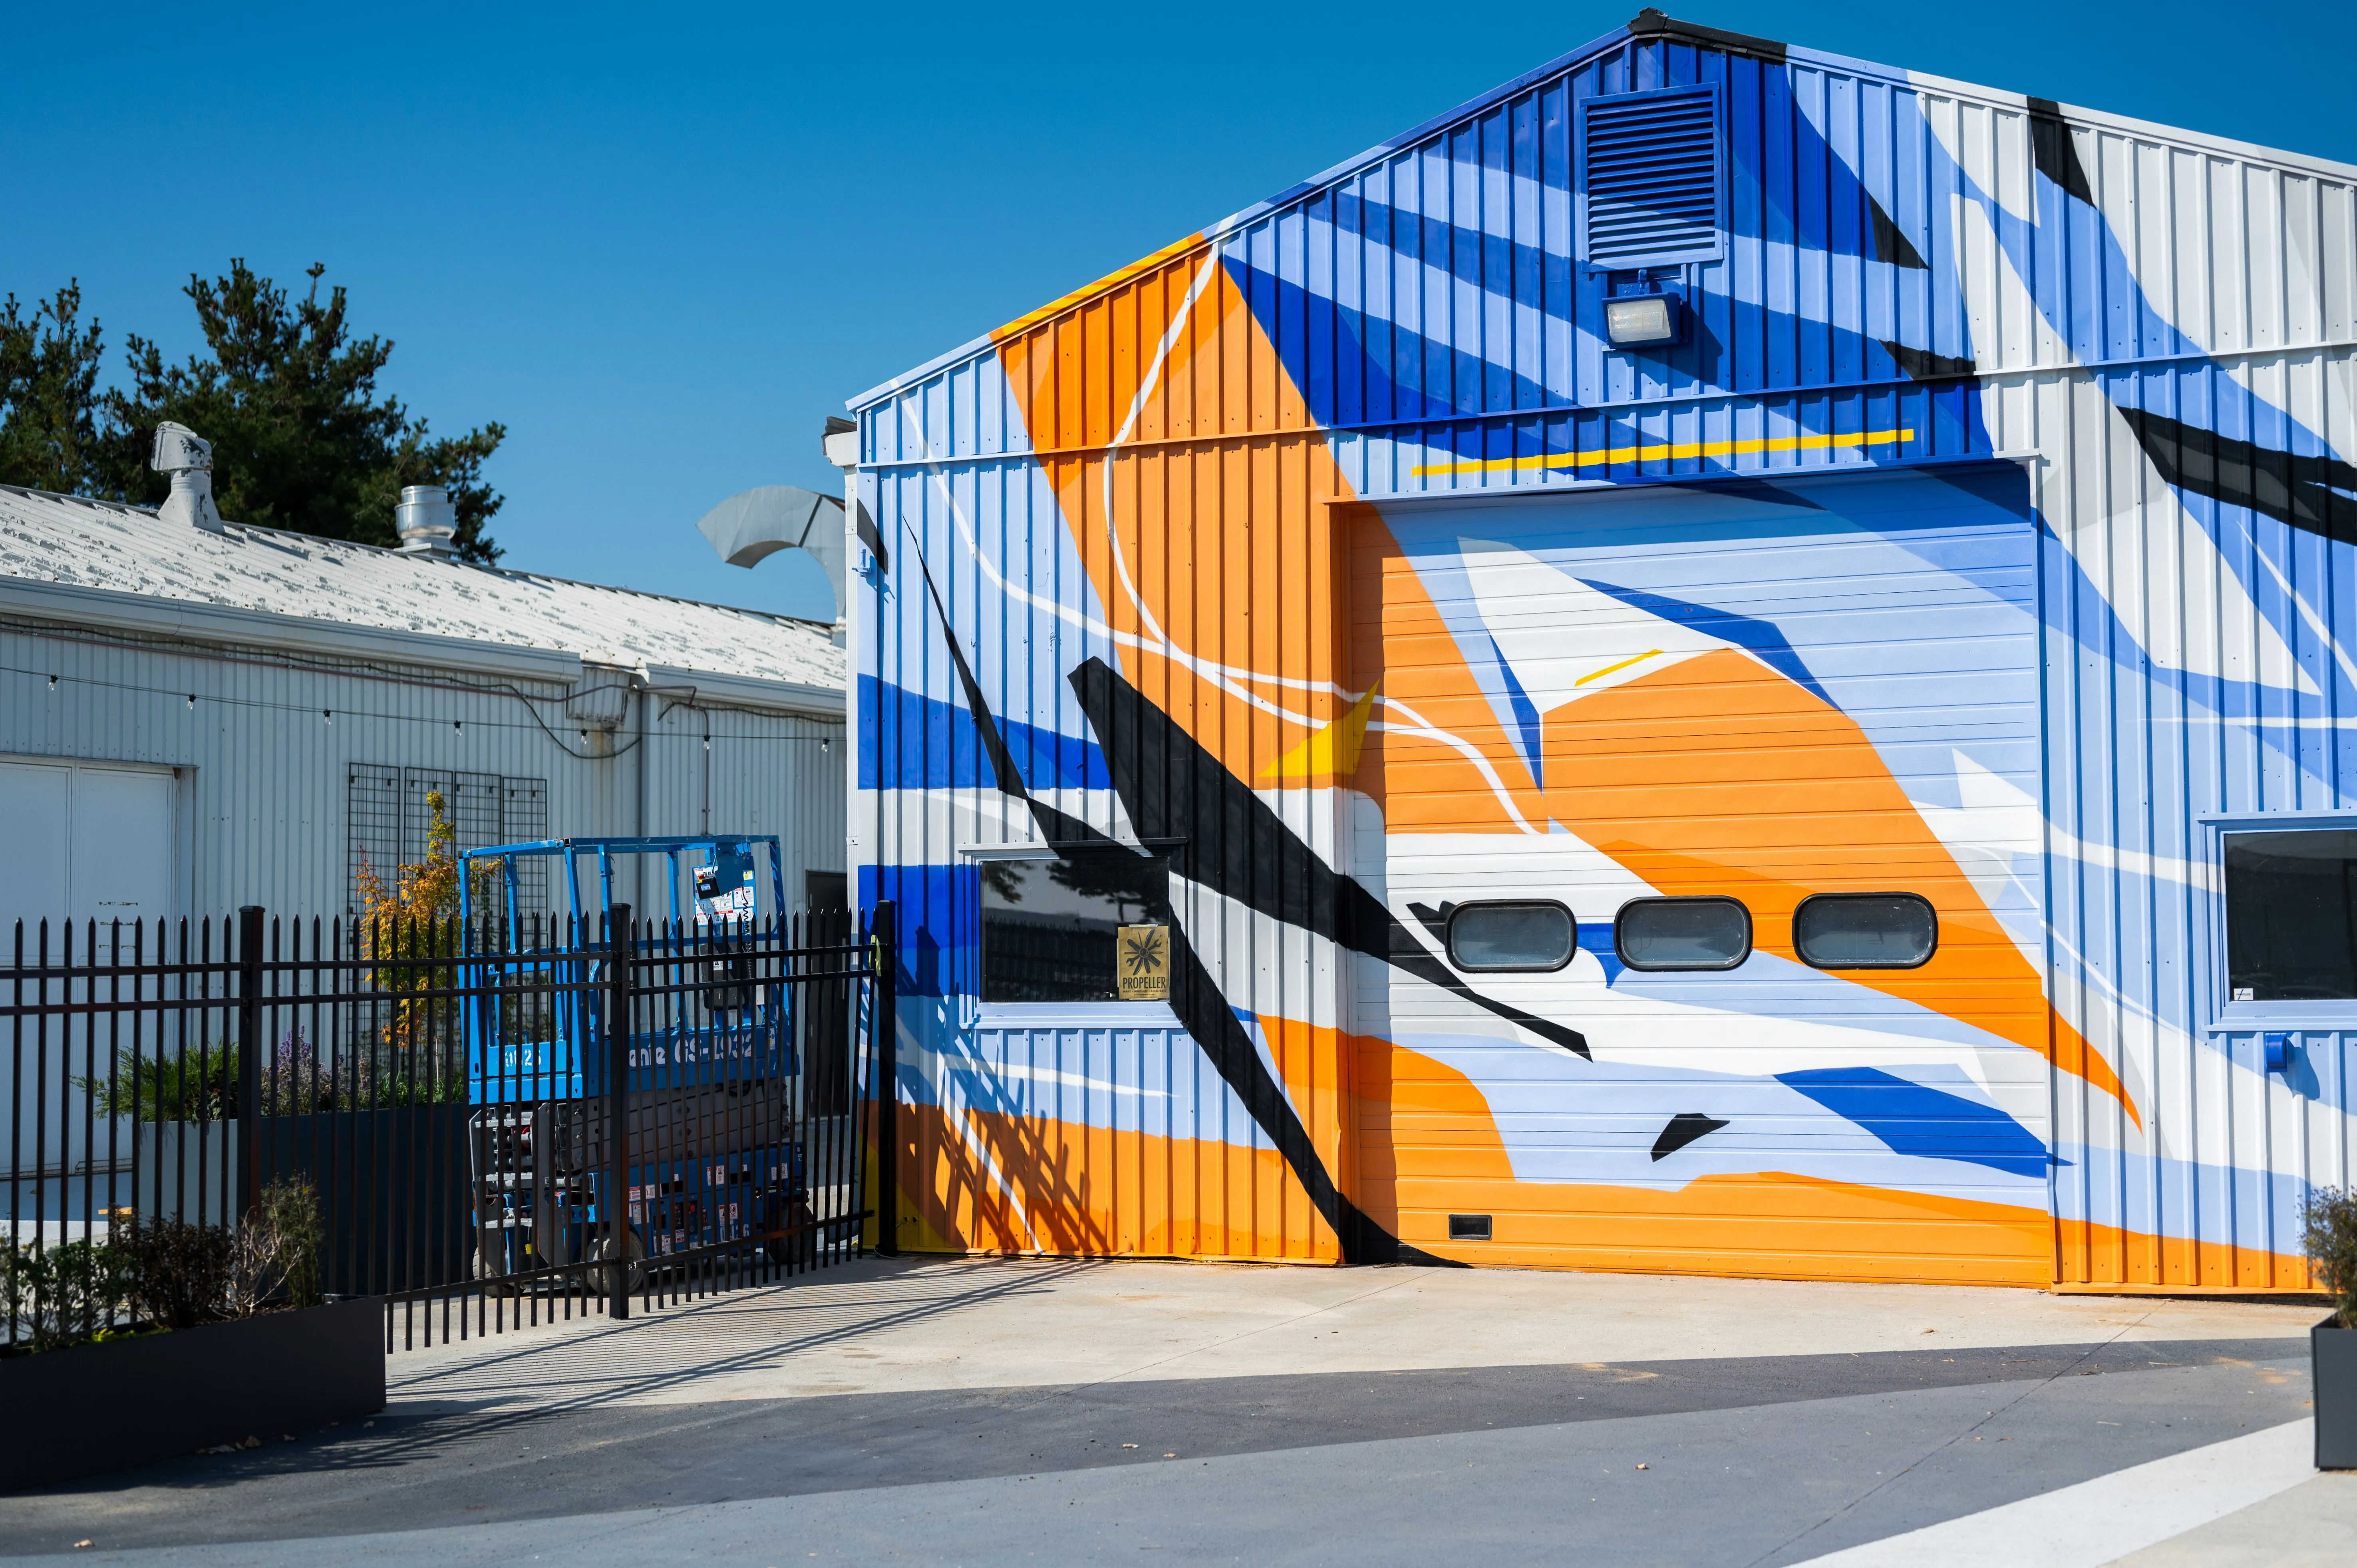 Industrial building with colorful abstract mural painted on the facade, featuring geometric shapes and stripes in blue, orange, and white, with gated entryway and clear blue sky.